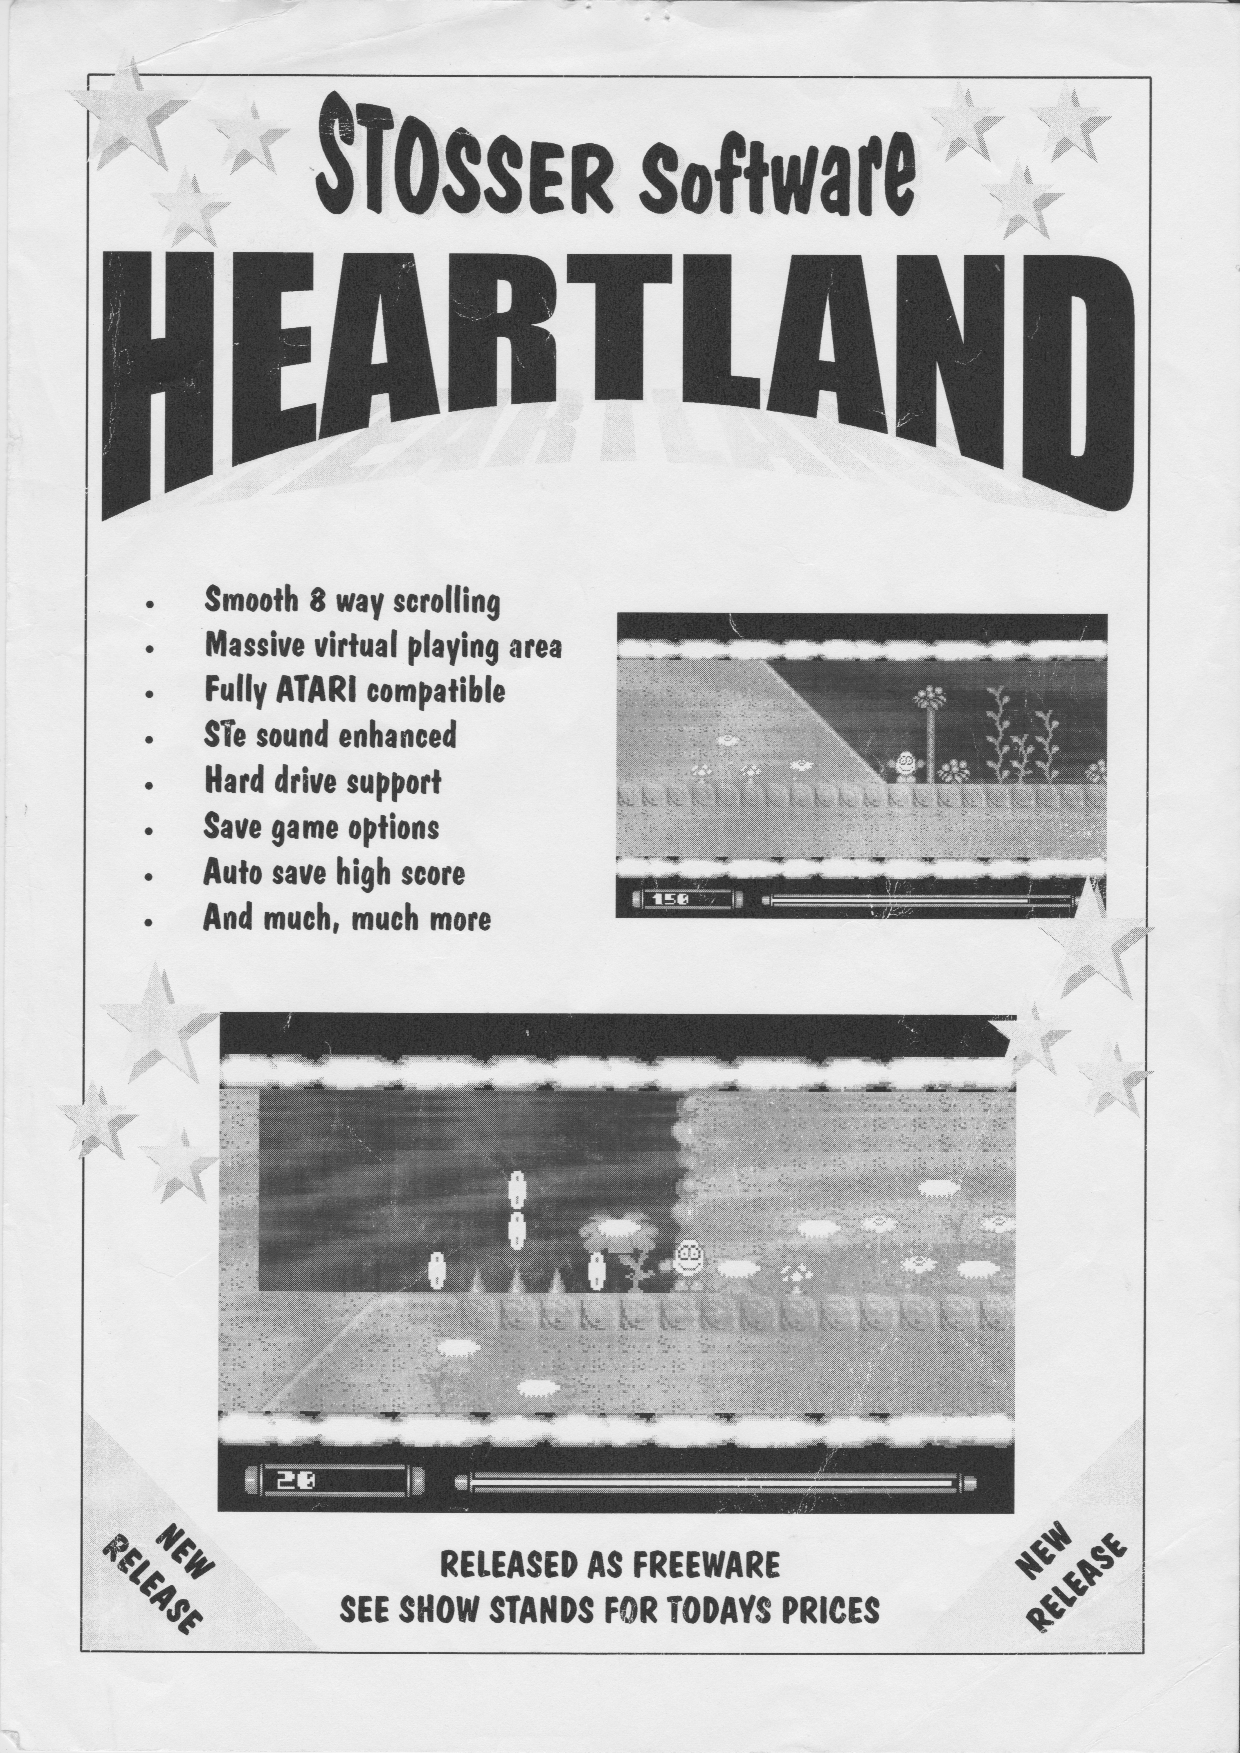 A rare advert for Tony's first platform game called Heartland.